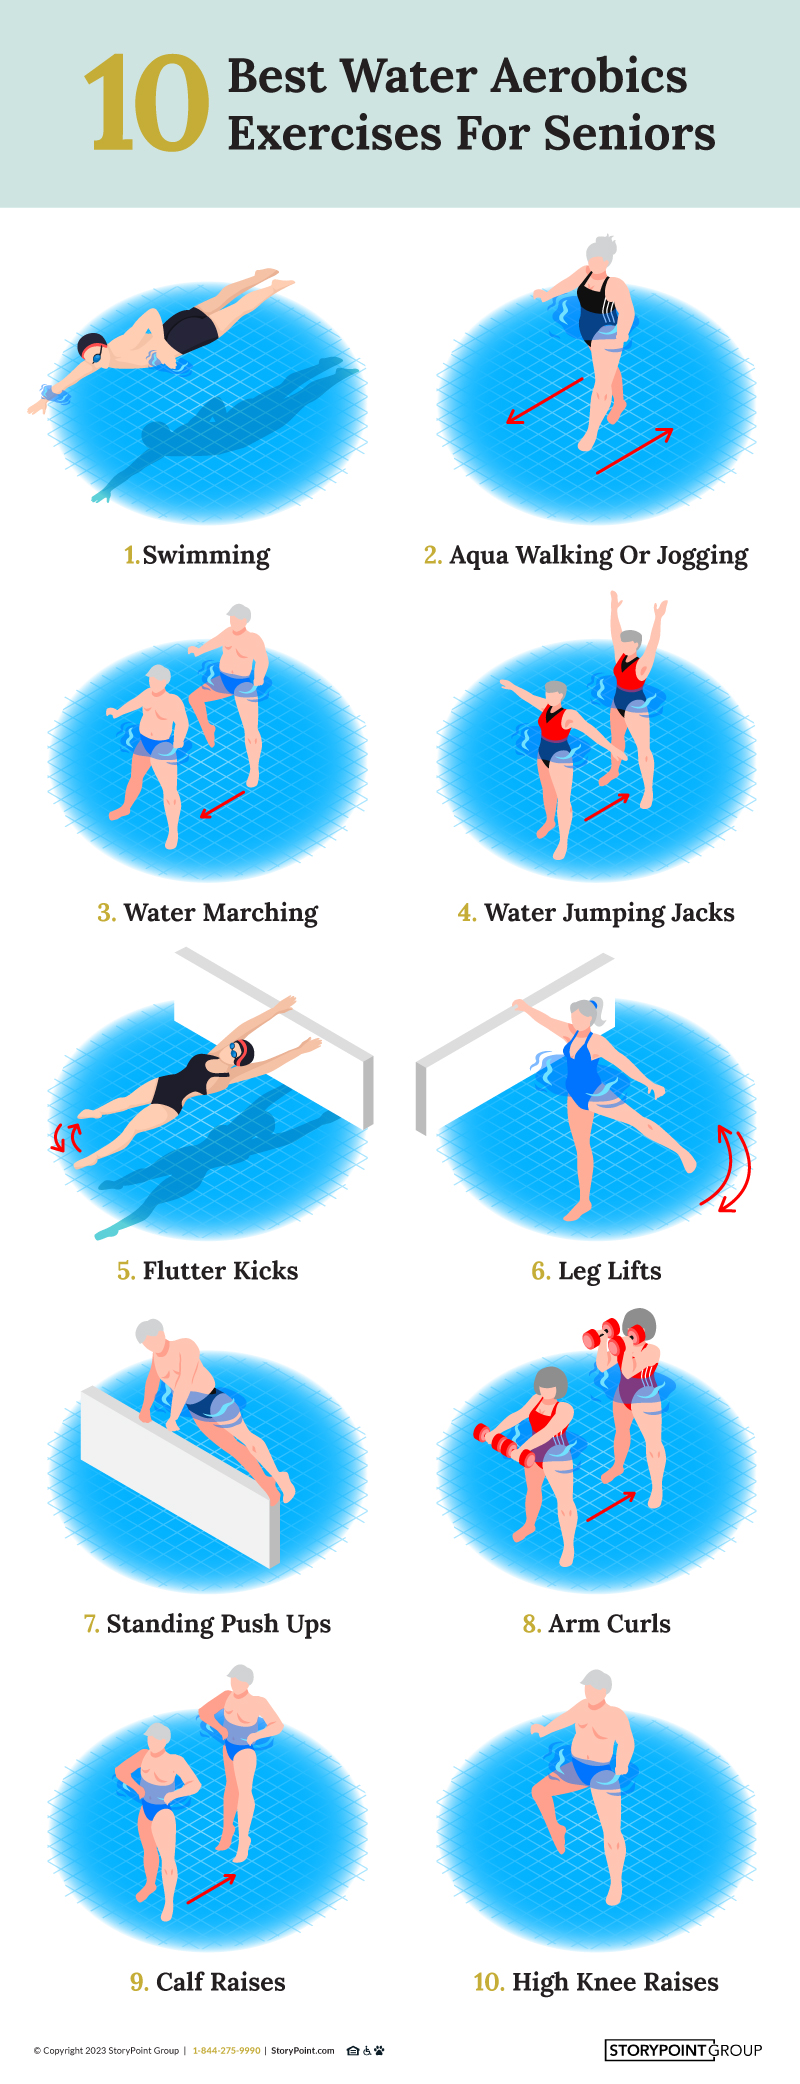 Water Aerobics For Seniors: 10 Of The Best Exercises